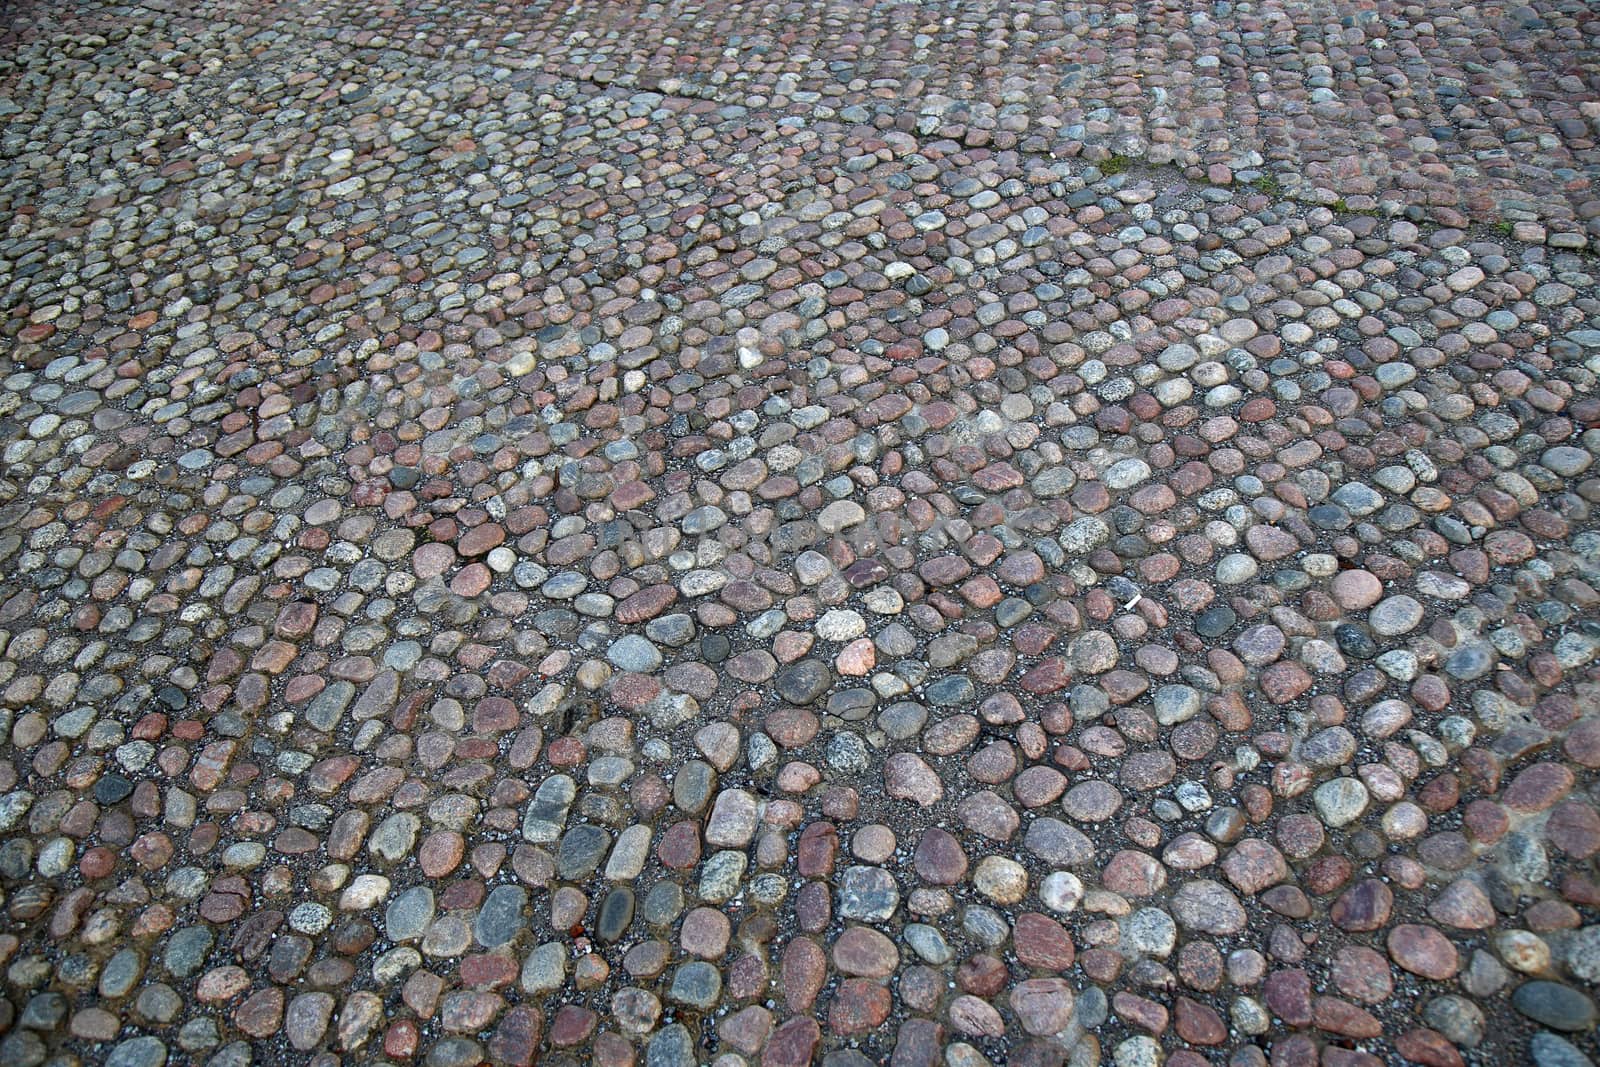  Cobblestone Pavement located on the Slottsbacken street near the Royal Palace in Stockholm, Sweden